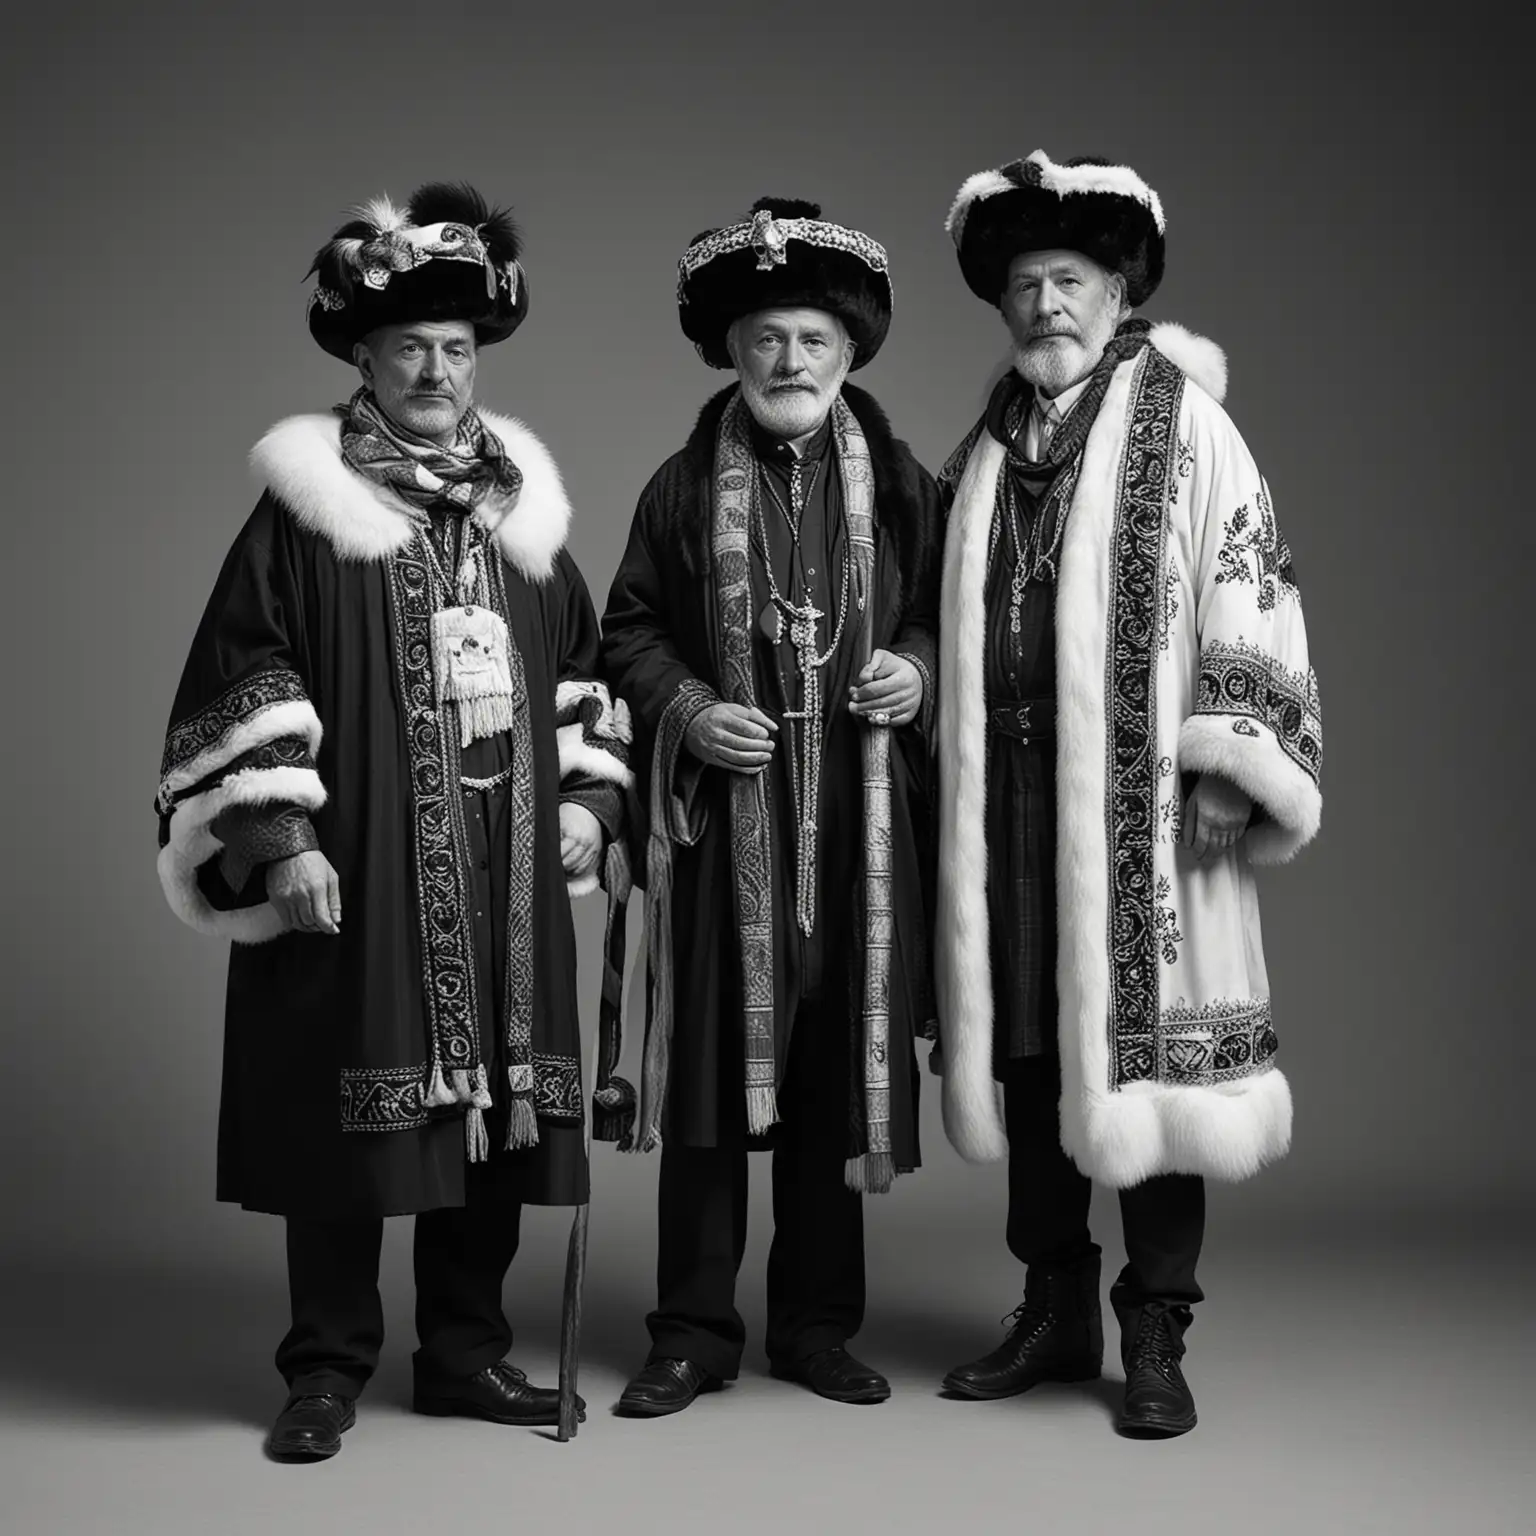 Black and white; two men; square built fifty-year-old man in ceremonial Christian robes and scarves; he wears a fur hat and has a fur collar. The second man is a shorter, fatter man reminiscent of Cervantes’ Sancho Panza